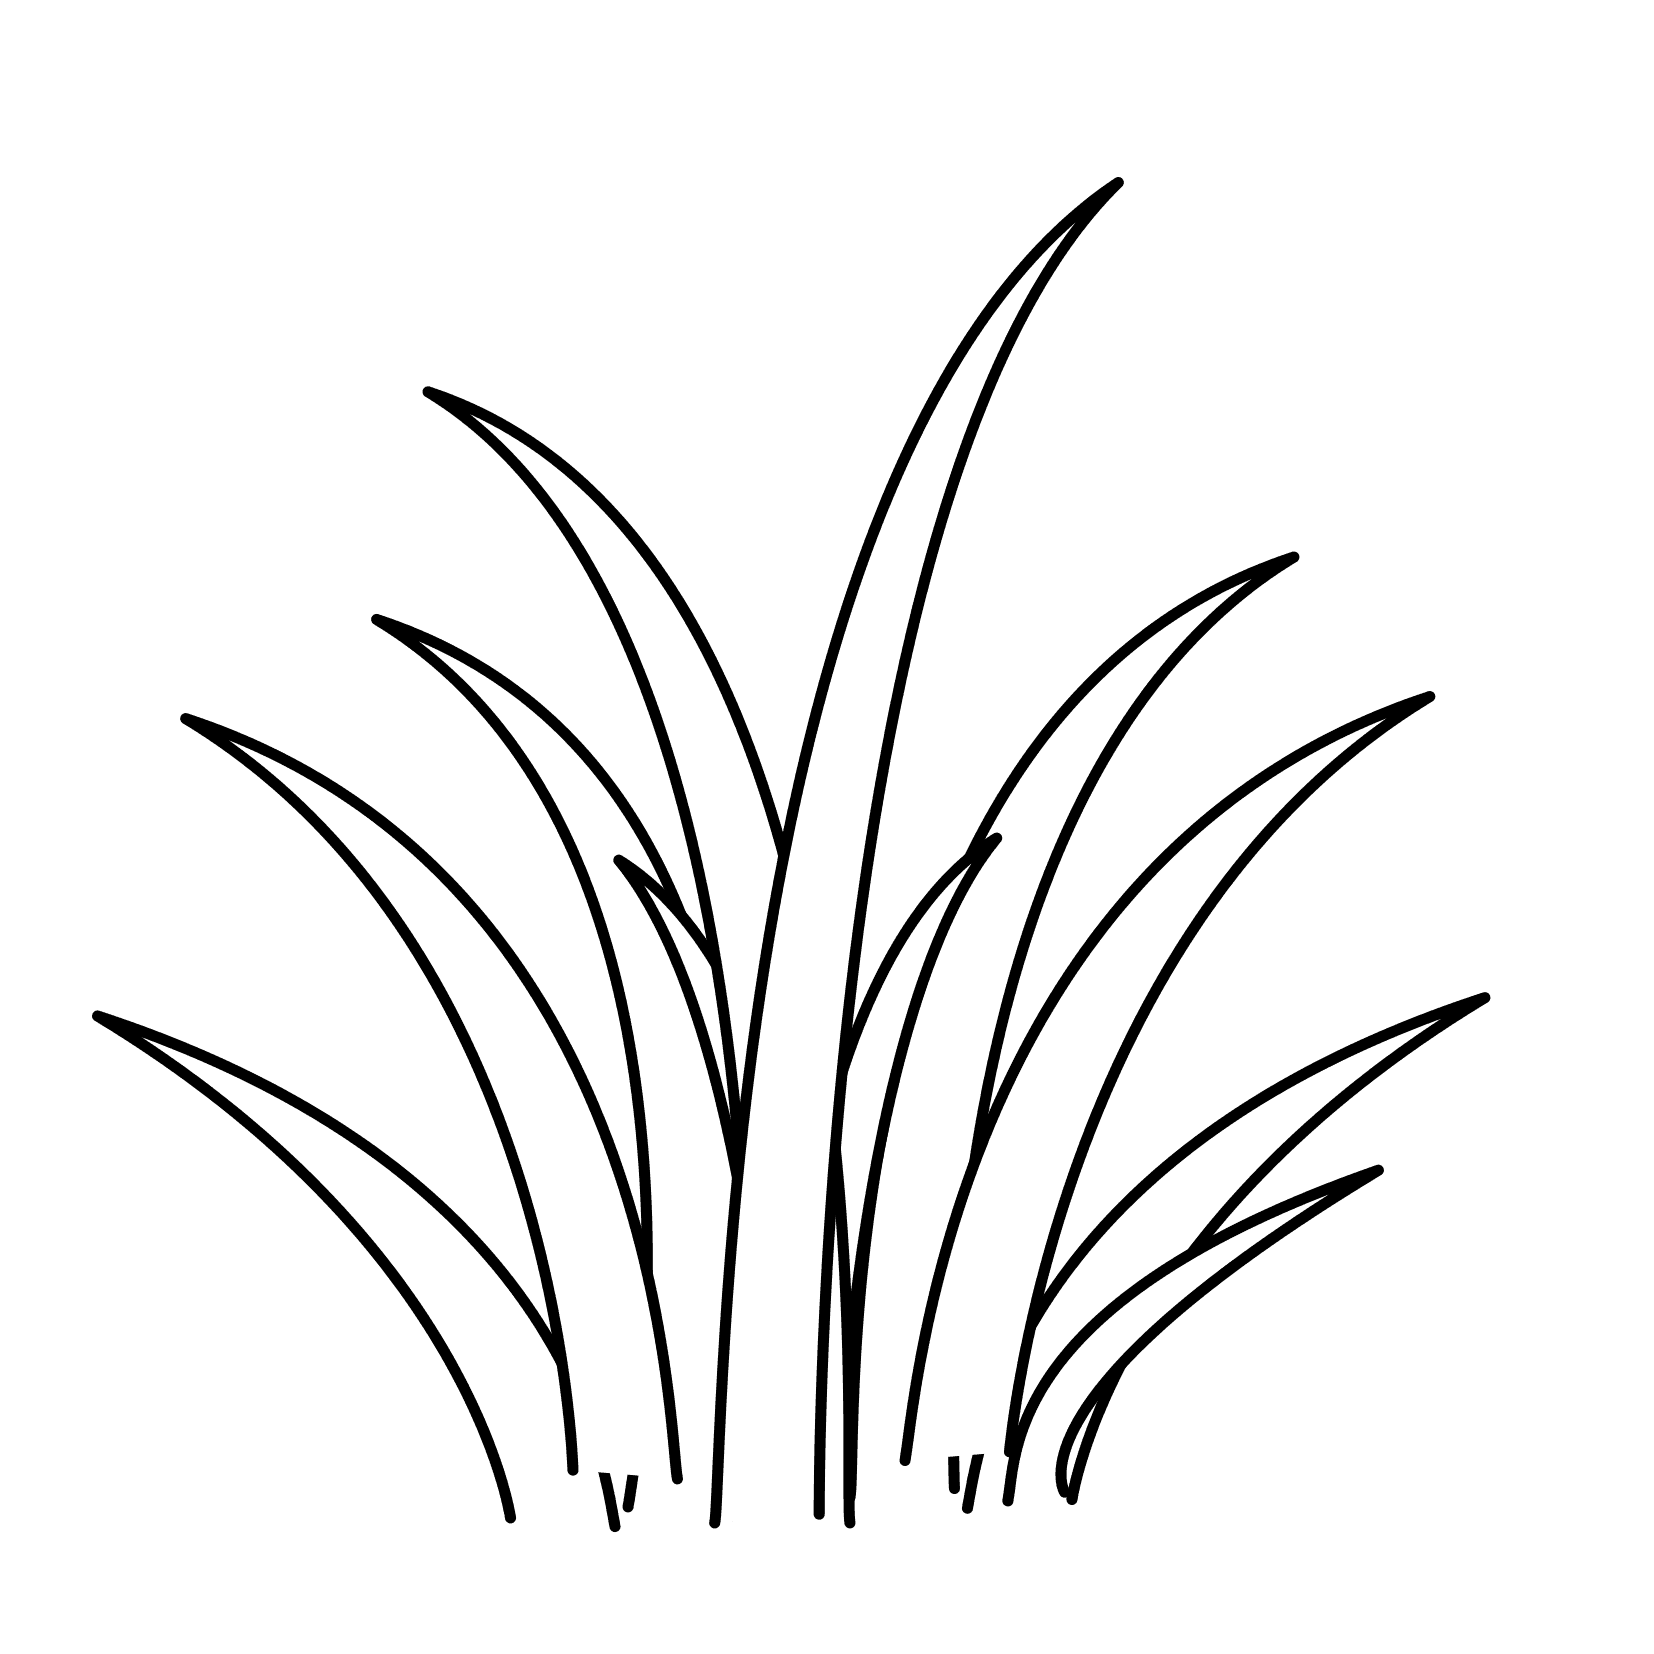 Pattern Of Printable Grass - ClipArt Best